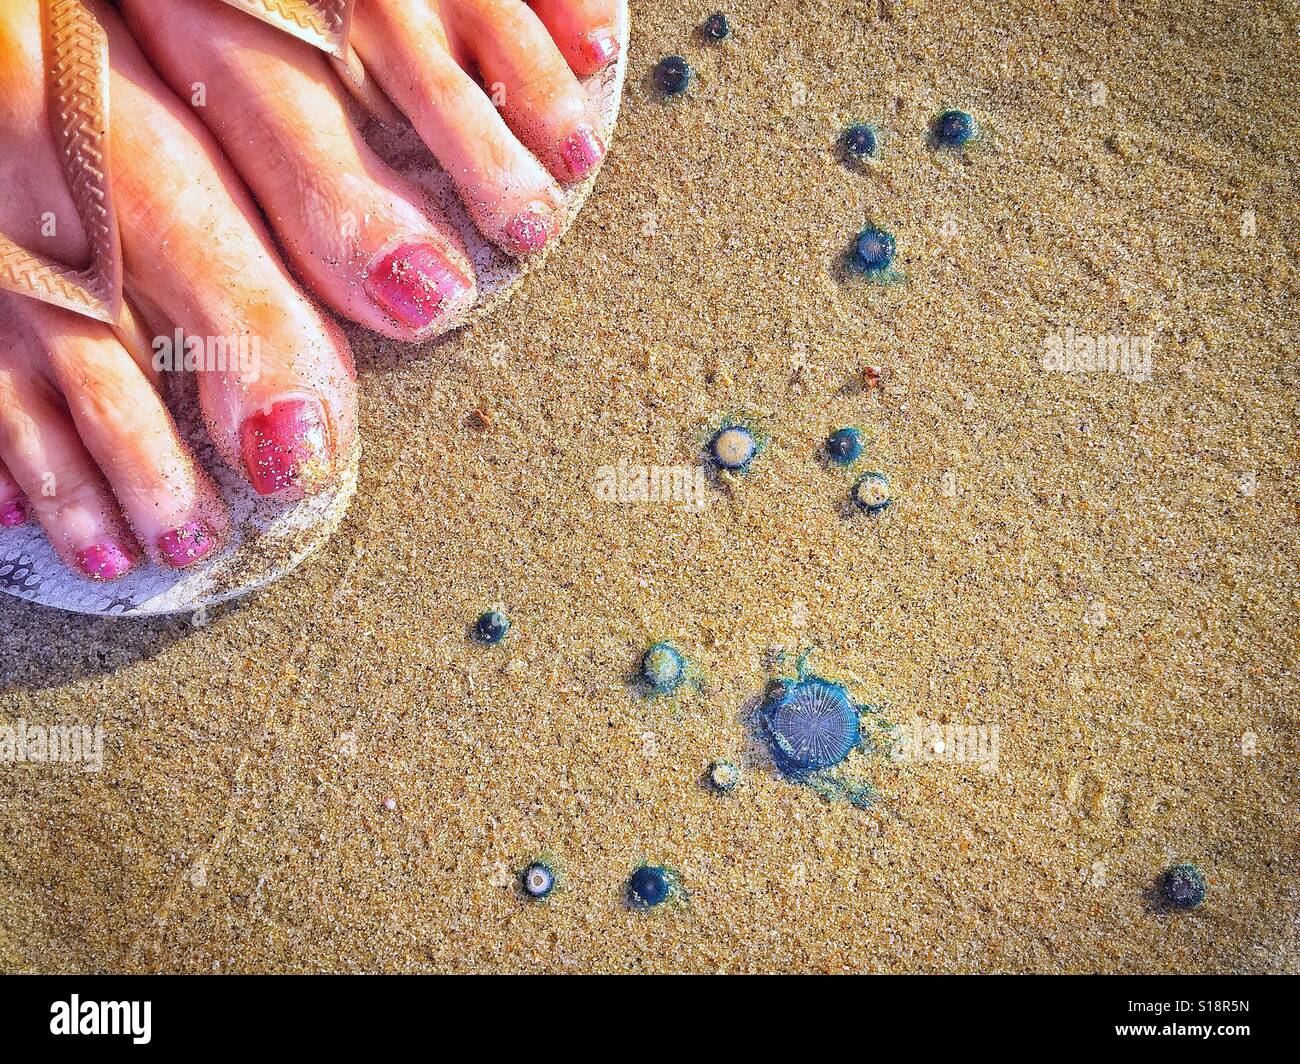 The toes of a woman's feet show the size of the tiny porpita porpita organisms that washed up on the beach in Nayarit, Mexico. Stock Photo